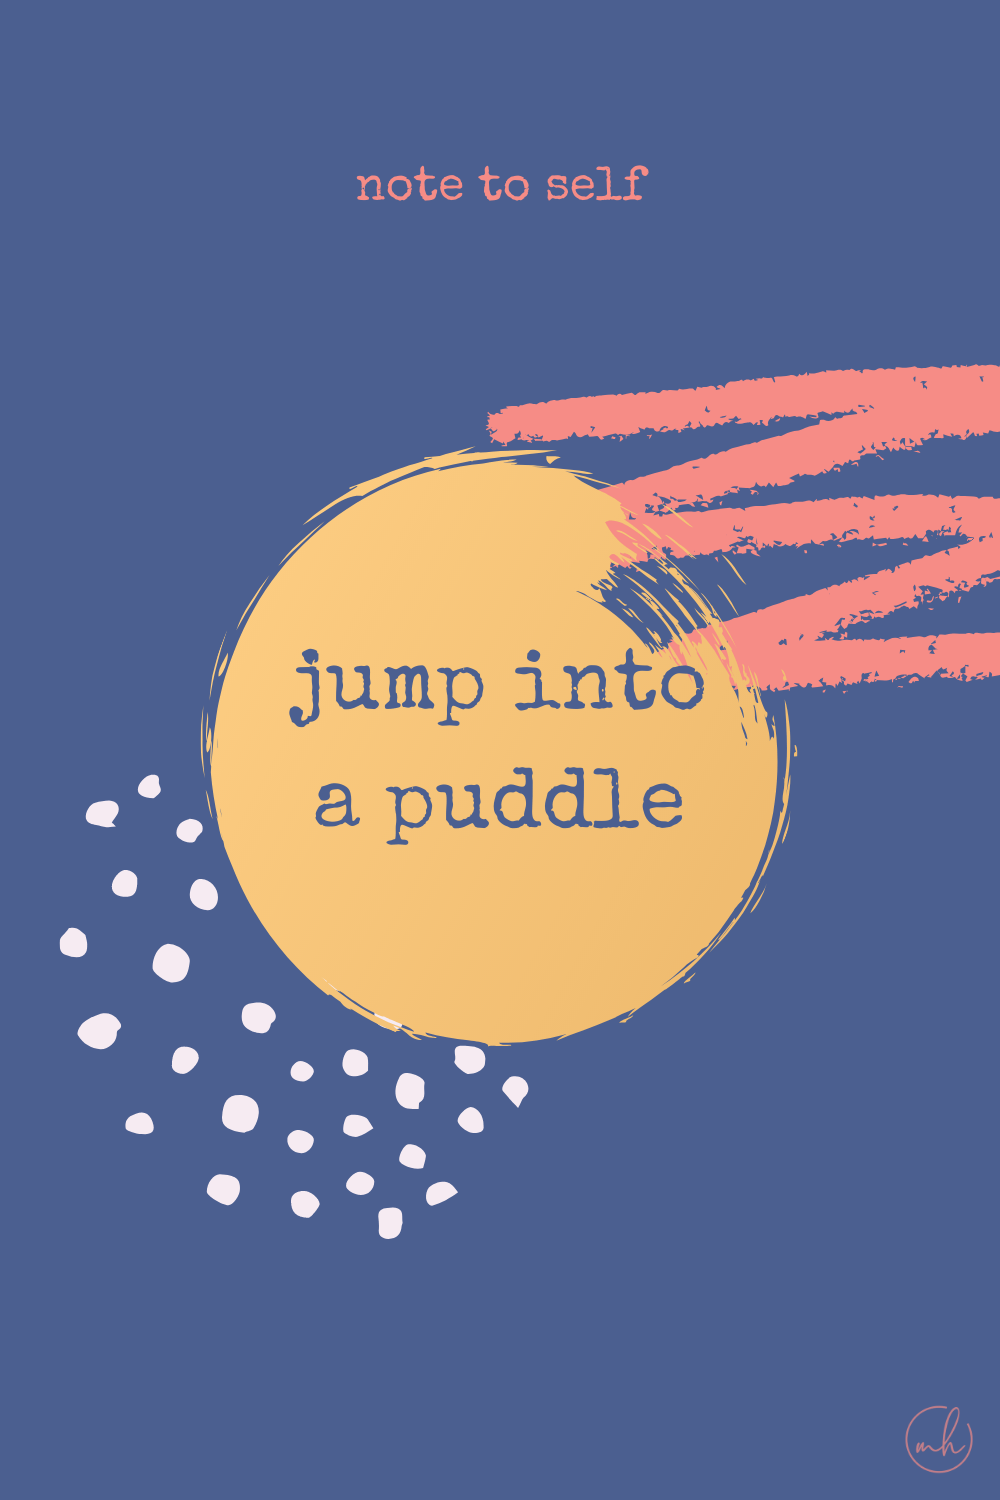 Jump into a puddle - Note to self quotes | myhoogah